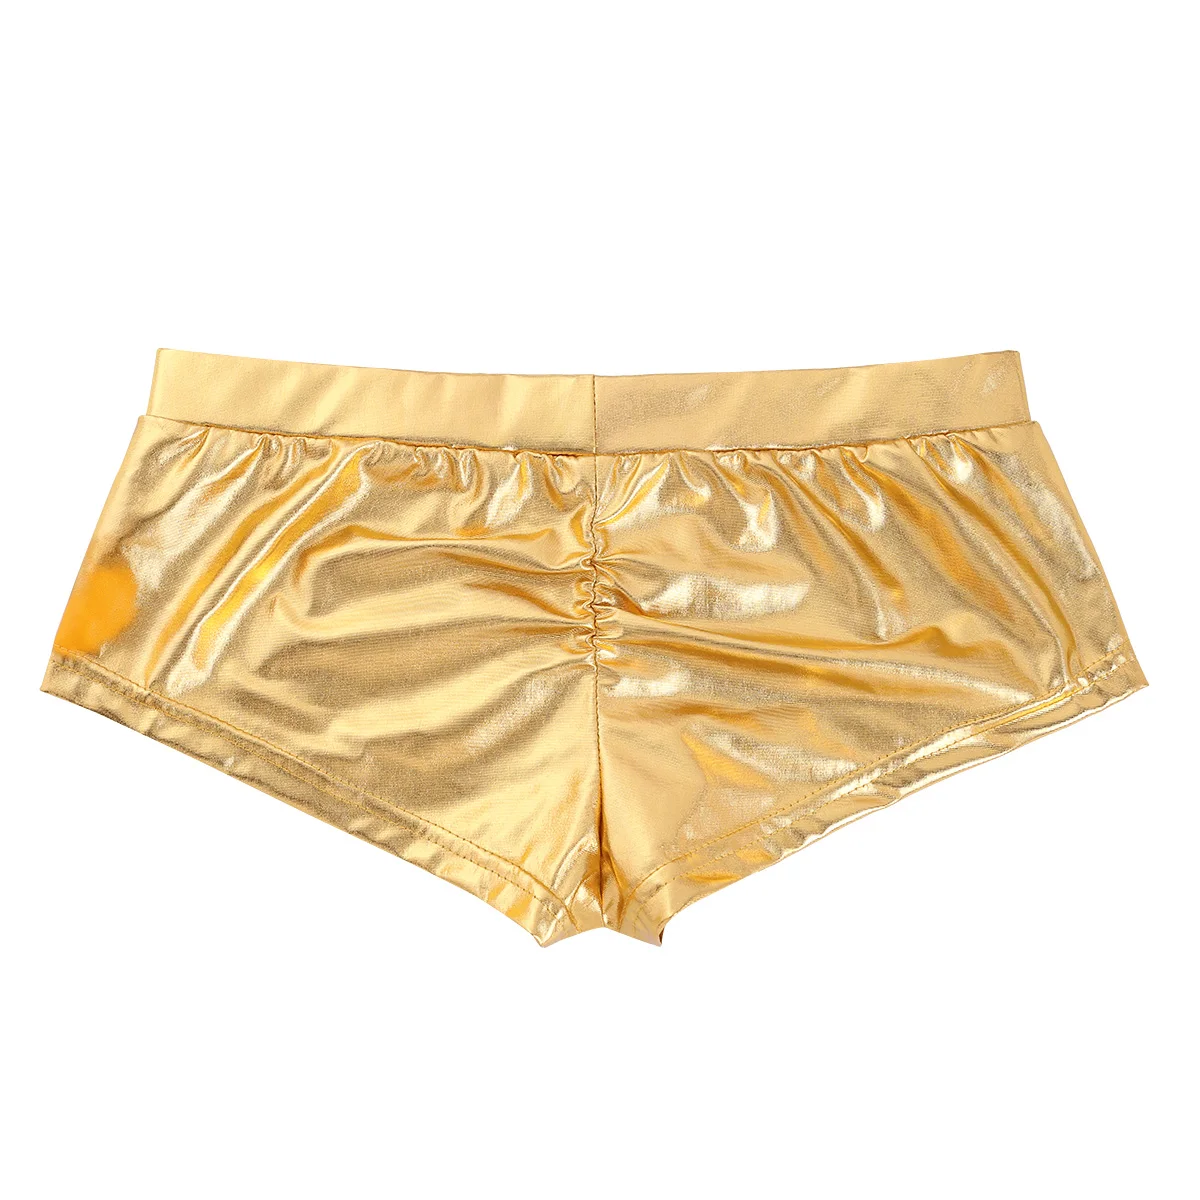 Underwear Hot Womens Shiny Faux Leather Thong Panties Underwear Shorts ...